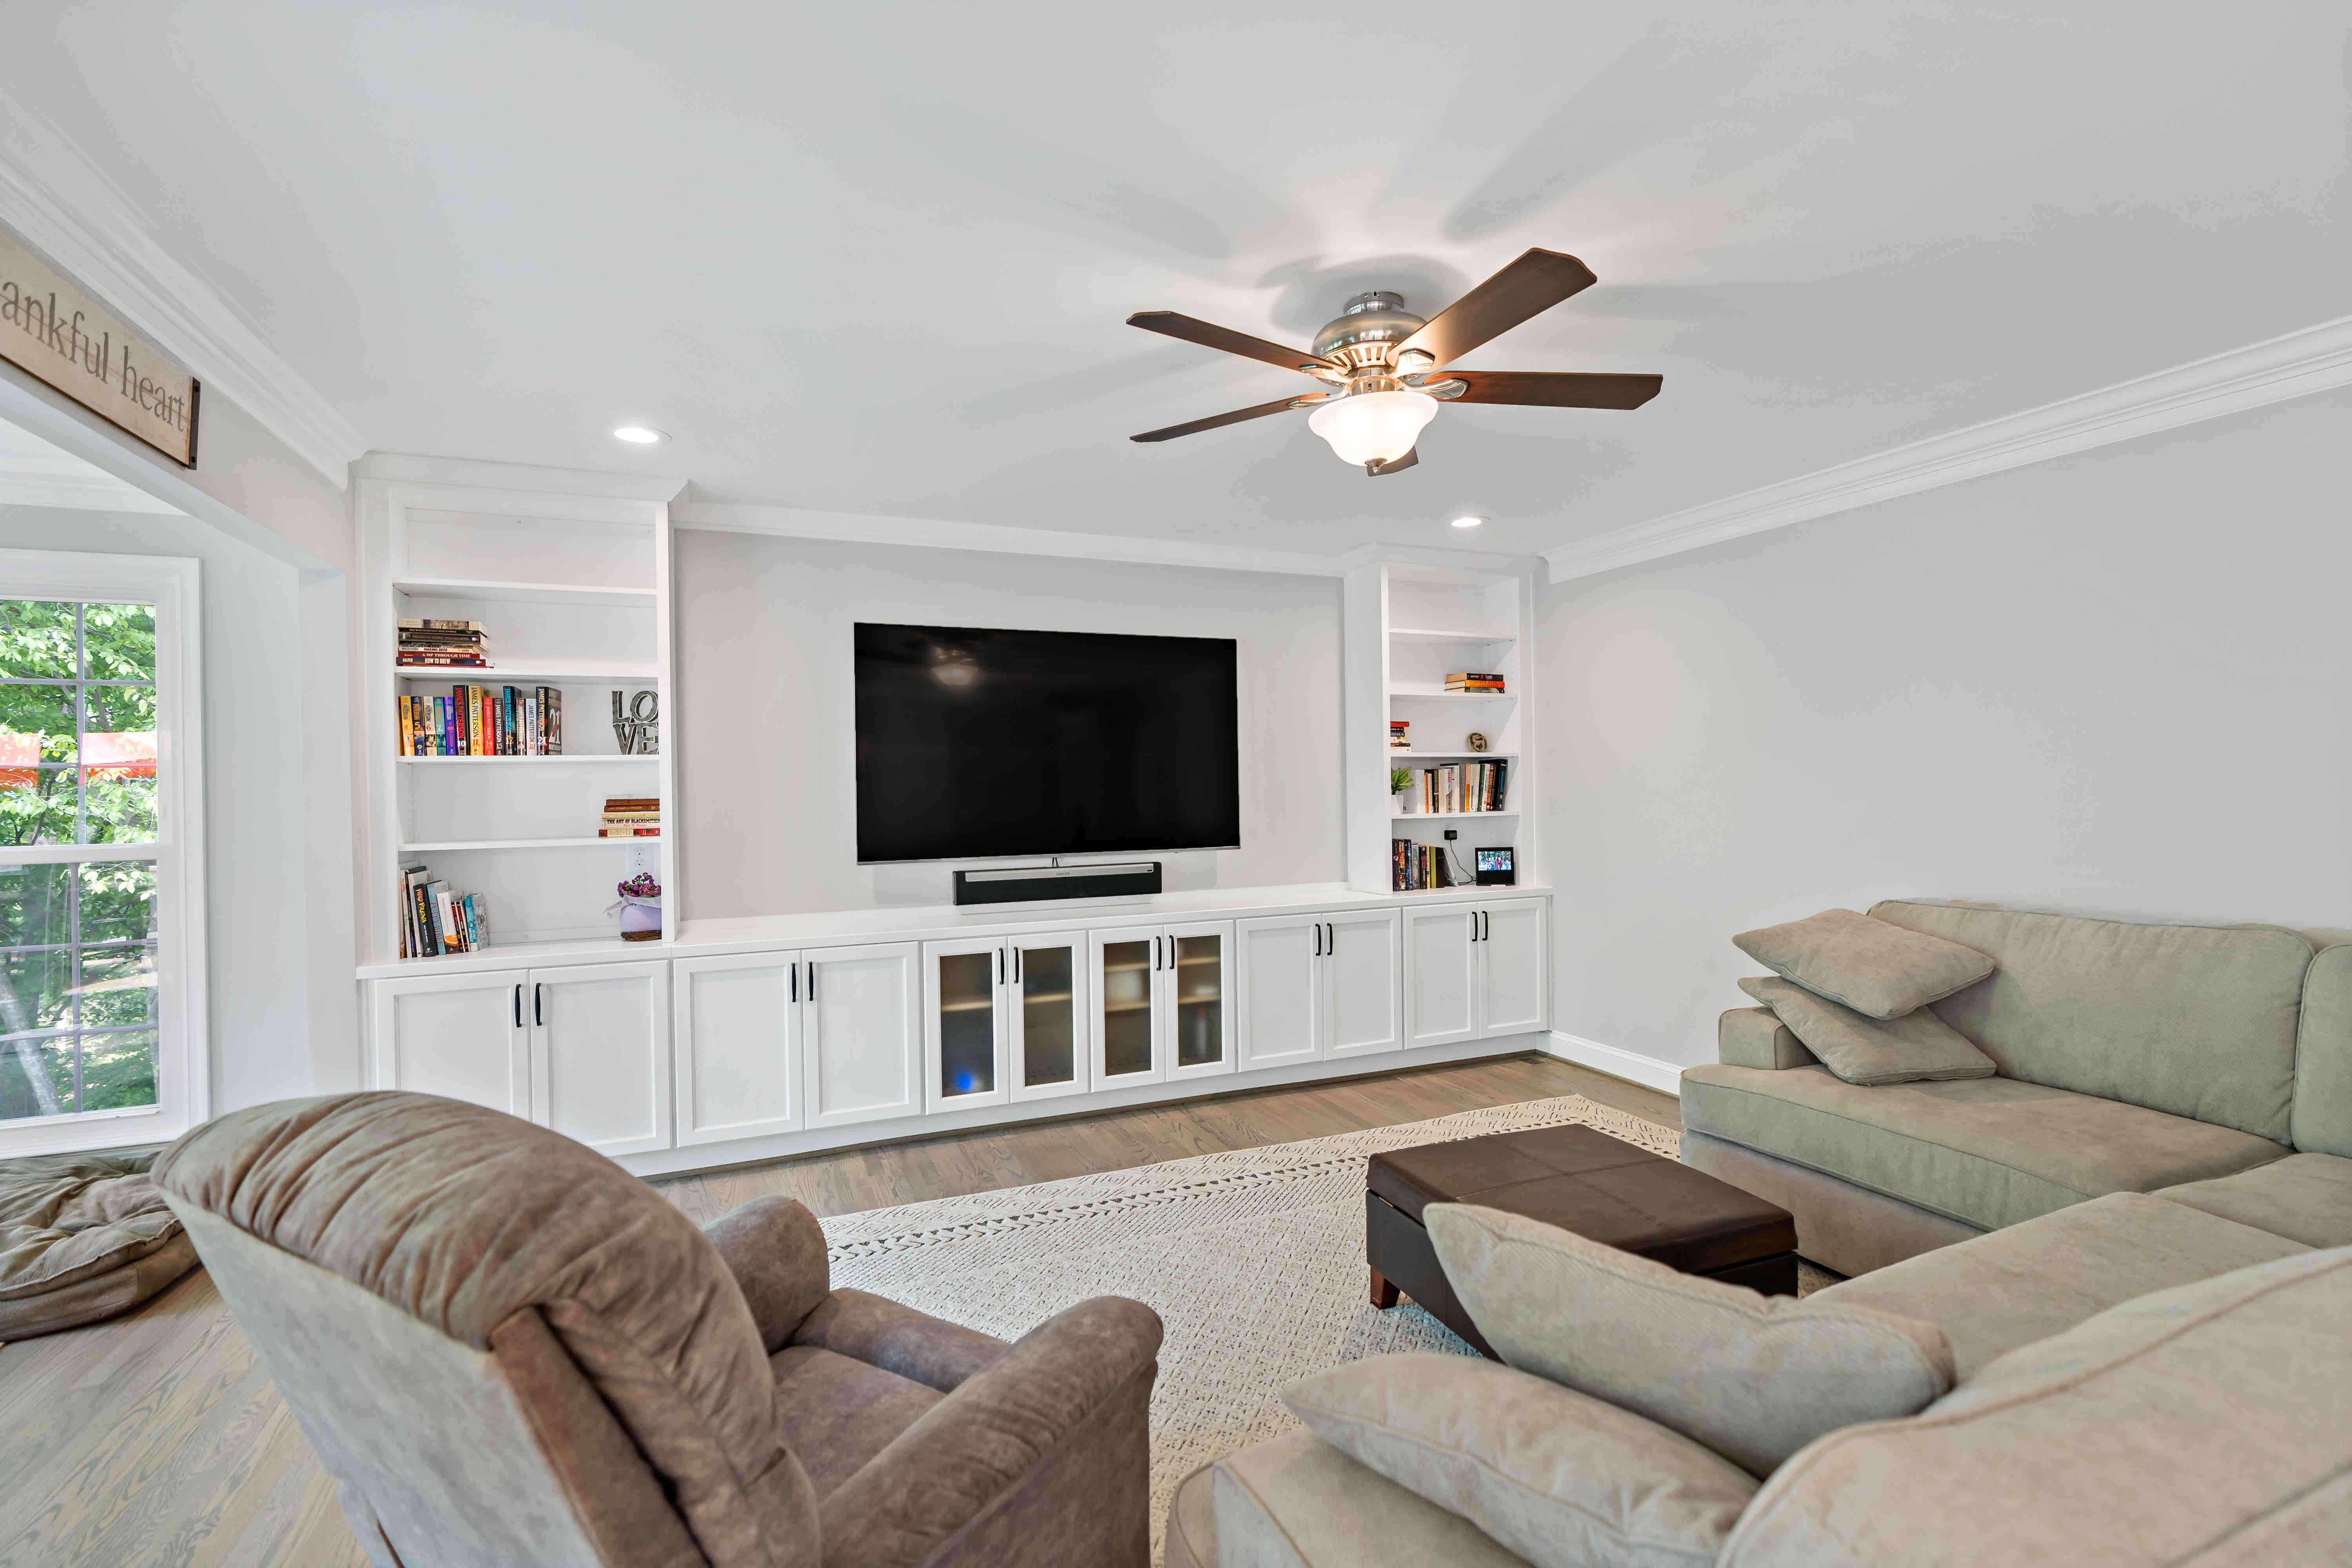 Ceiling fan in living room with built in shelves